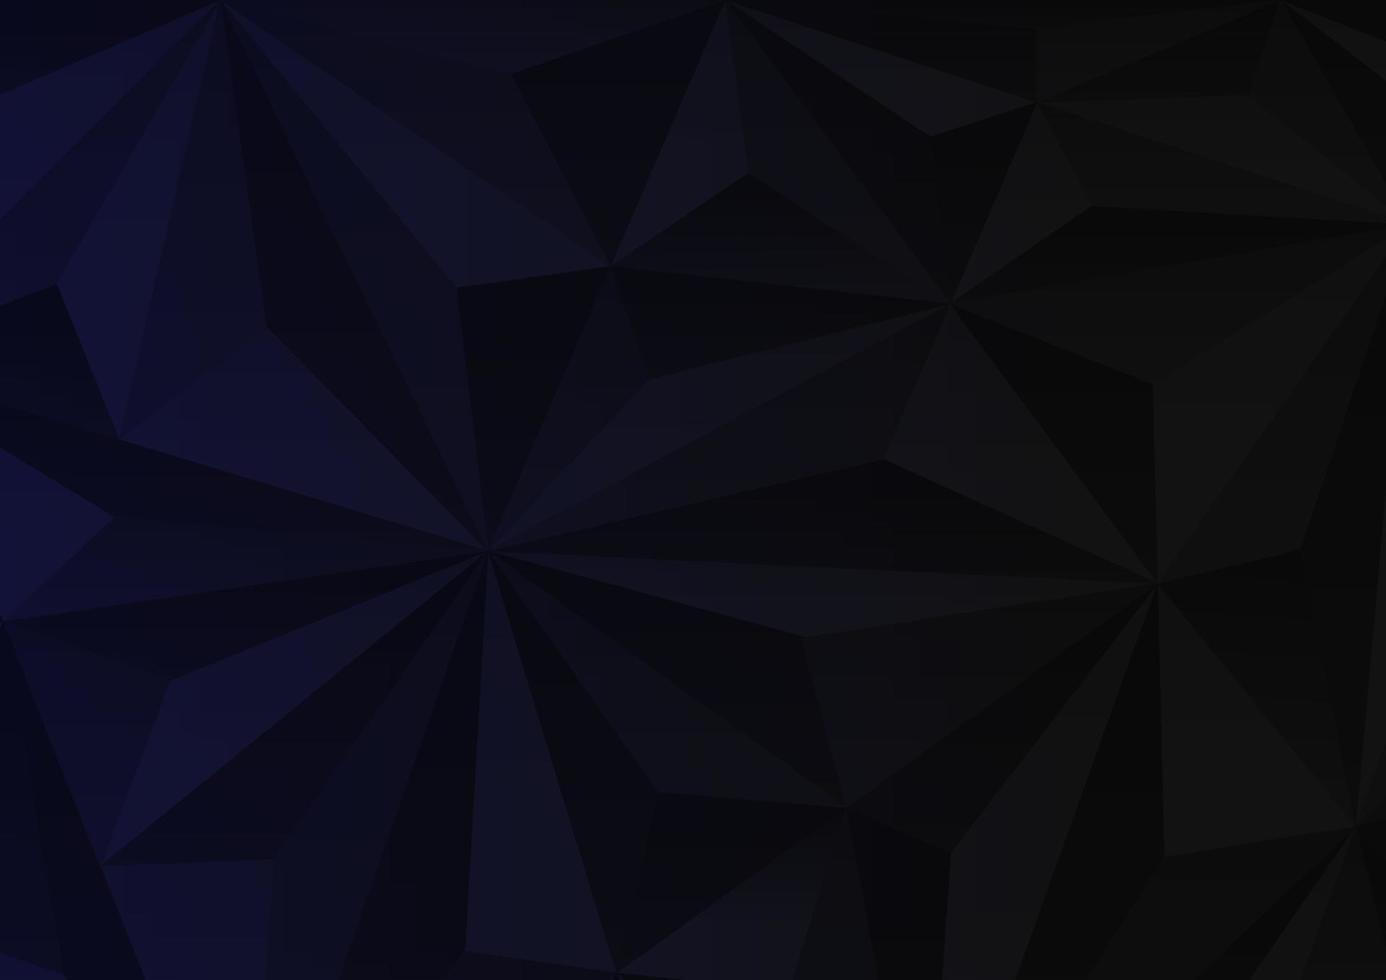 abstract low poly dark background with triangle shapes vector